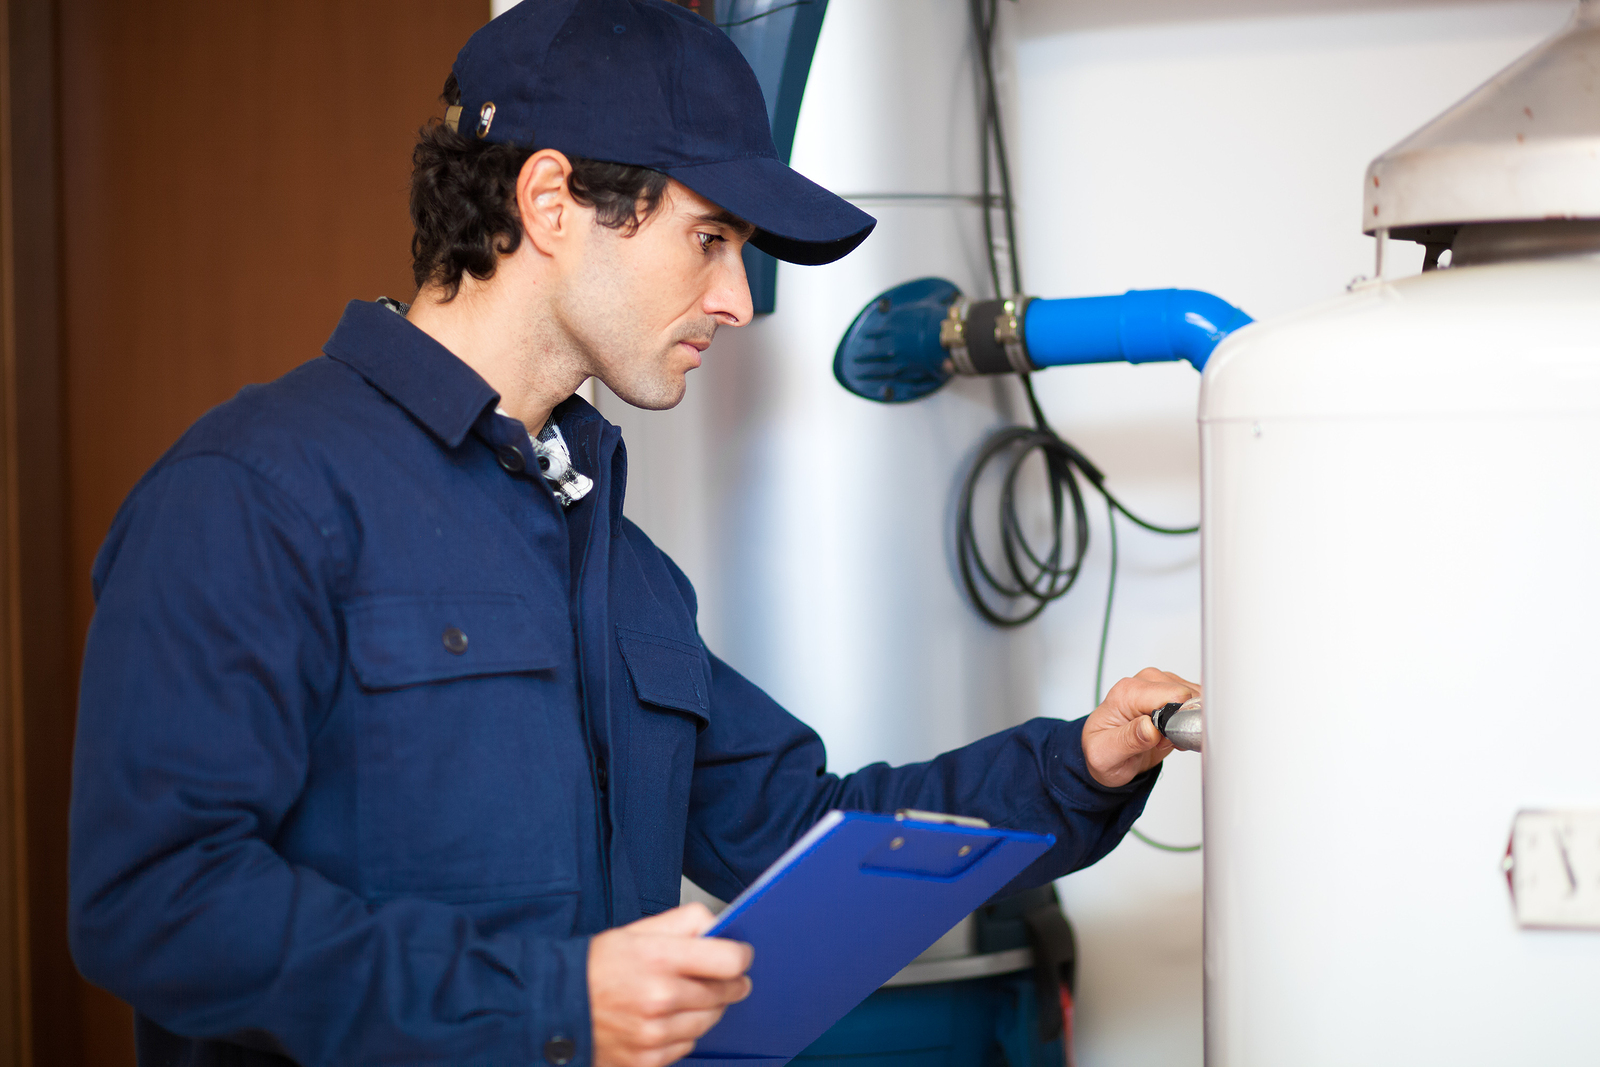 Water Heater Replacement Services in Suwanee GA